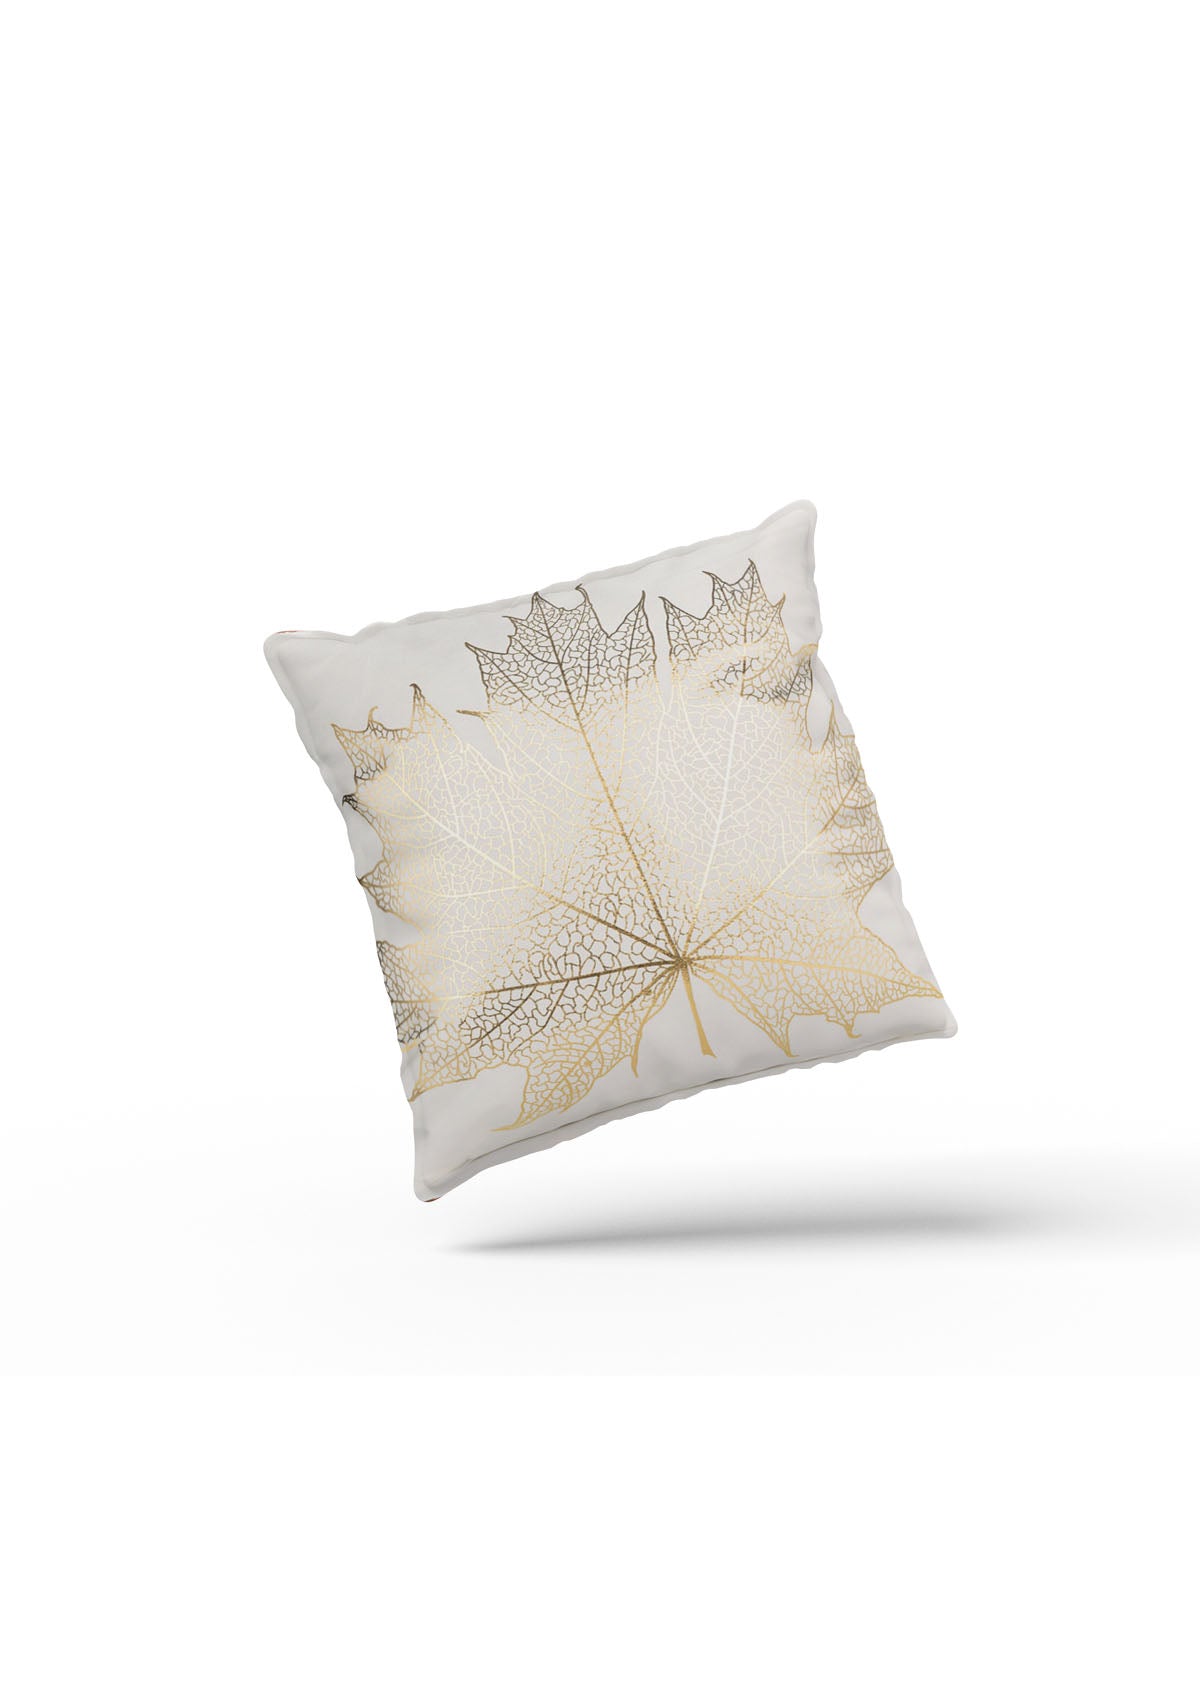 Glamorous gold foil cushion cover with textured fabric